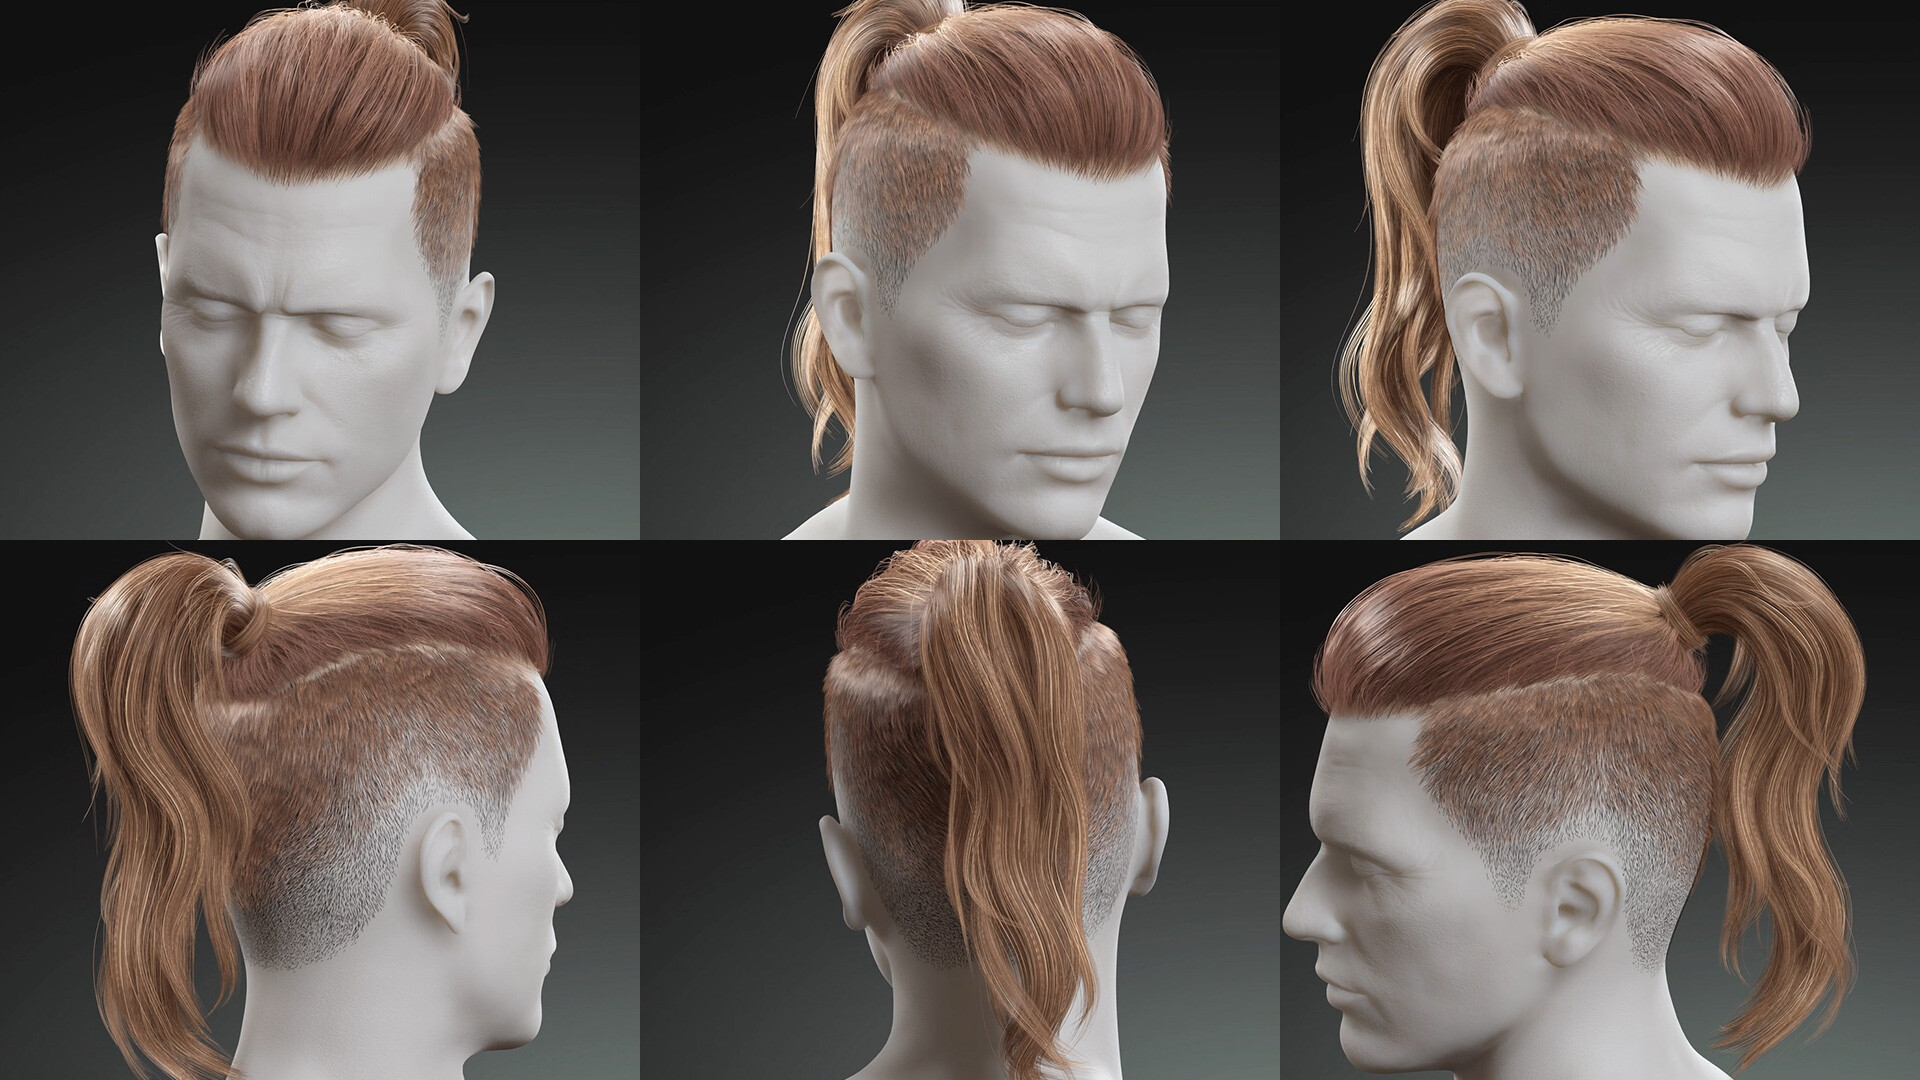 The Disconnected Undercut Hairstyle Mixes Long and Short - The New York  Times